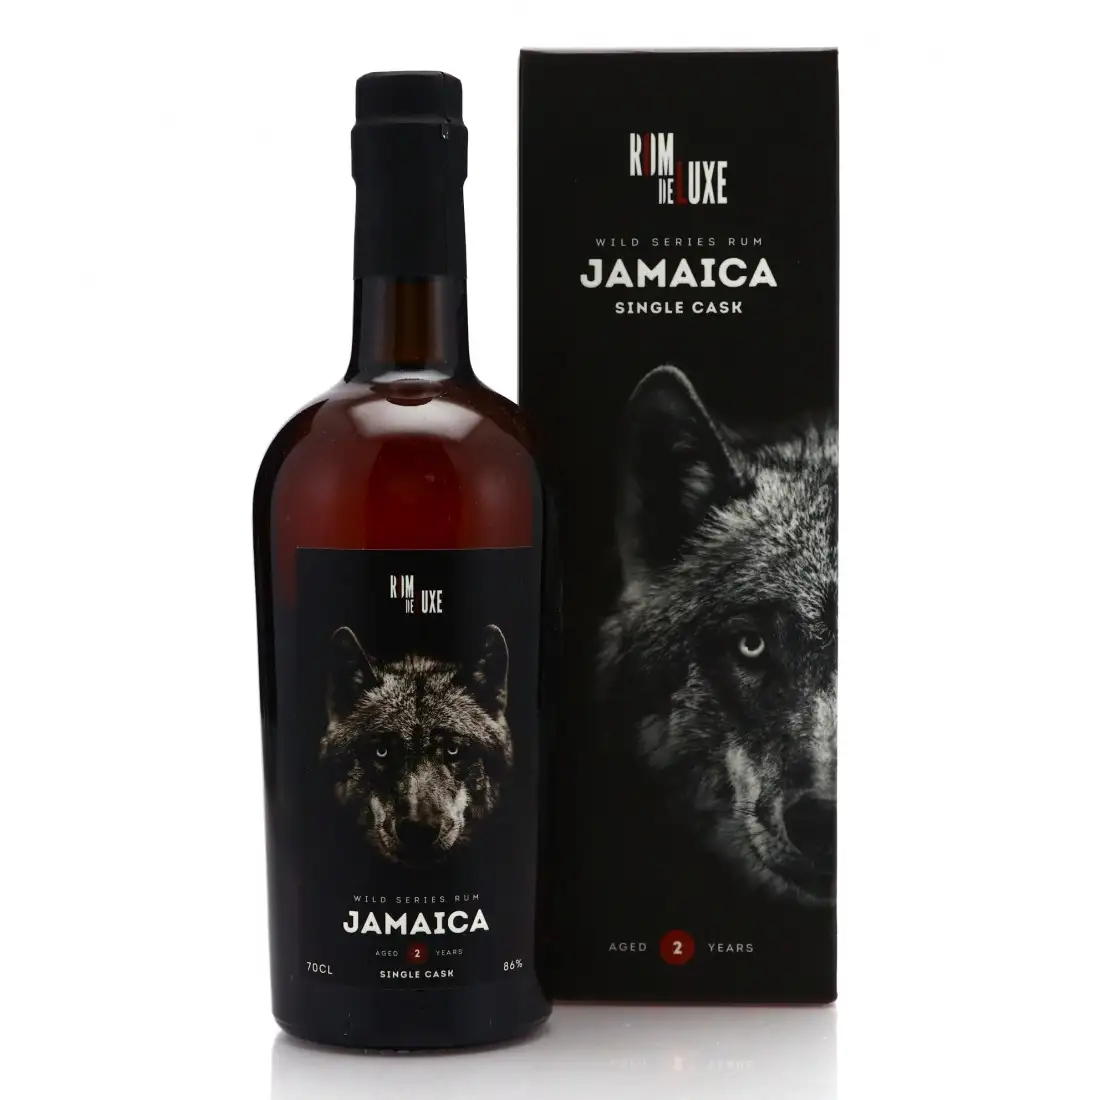 Image of the front of the bottle of the rum Wild Series Rum Jamaica No. 32 HGML